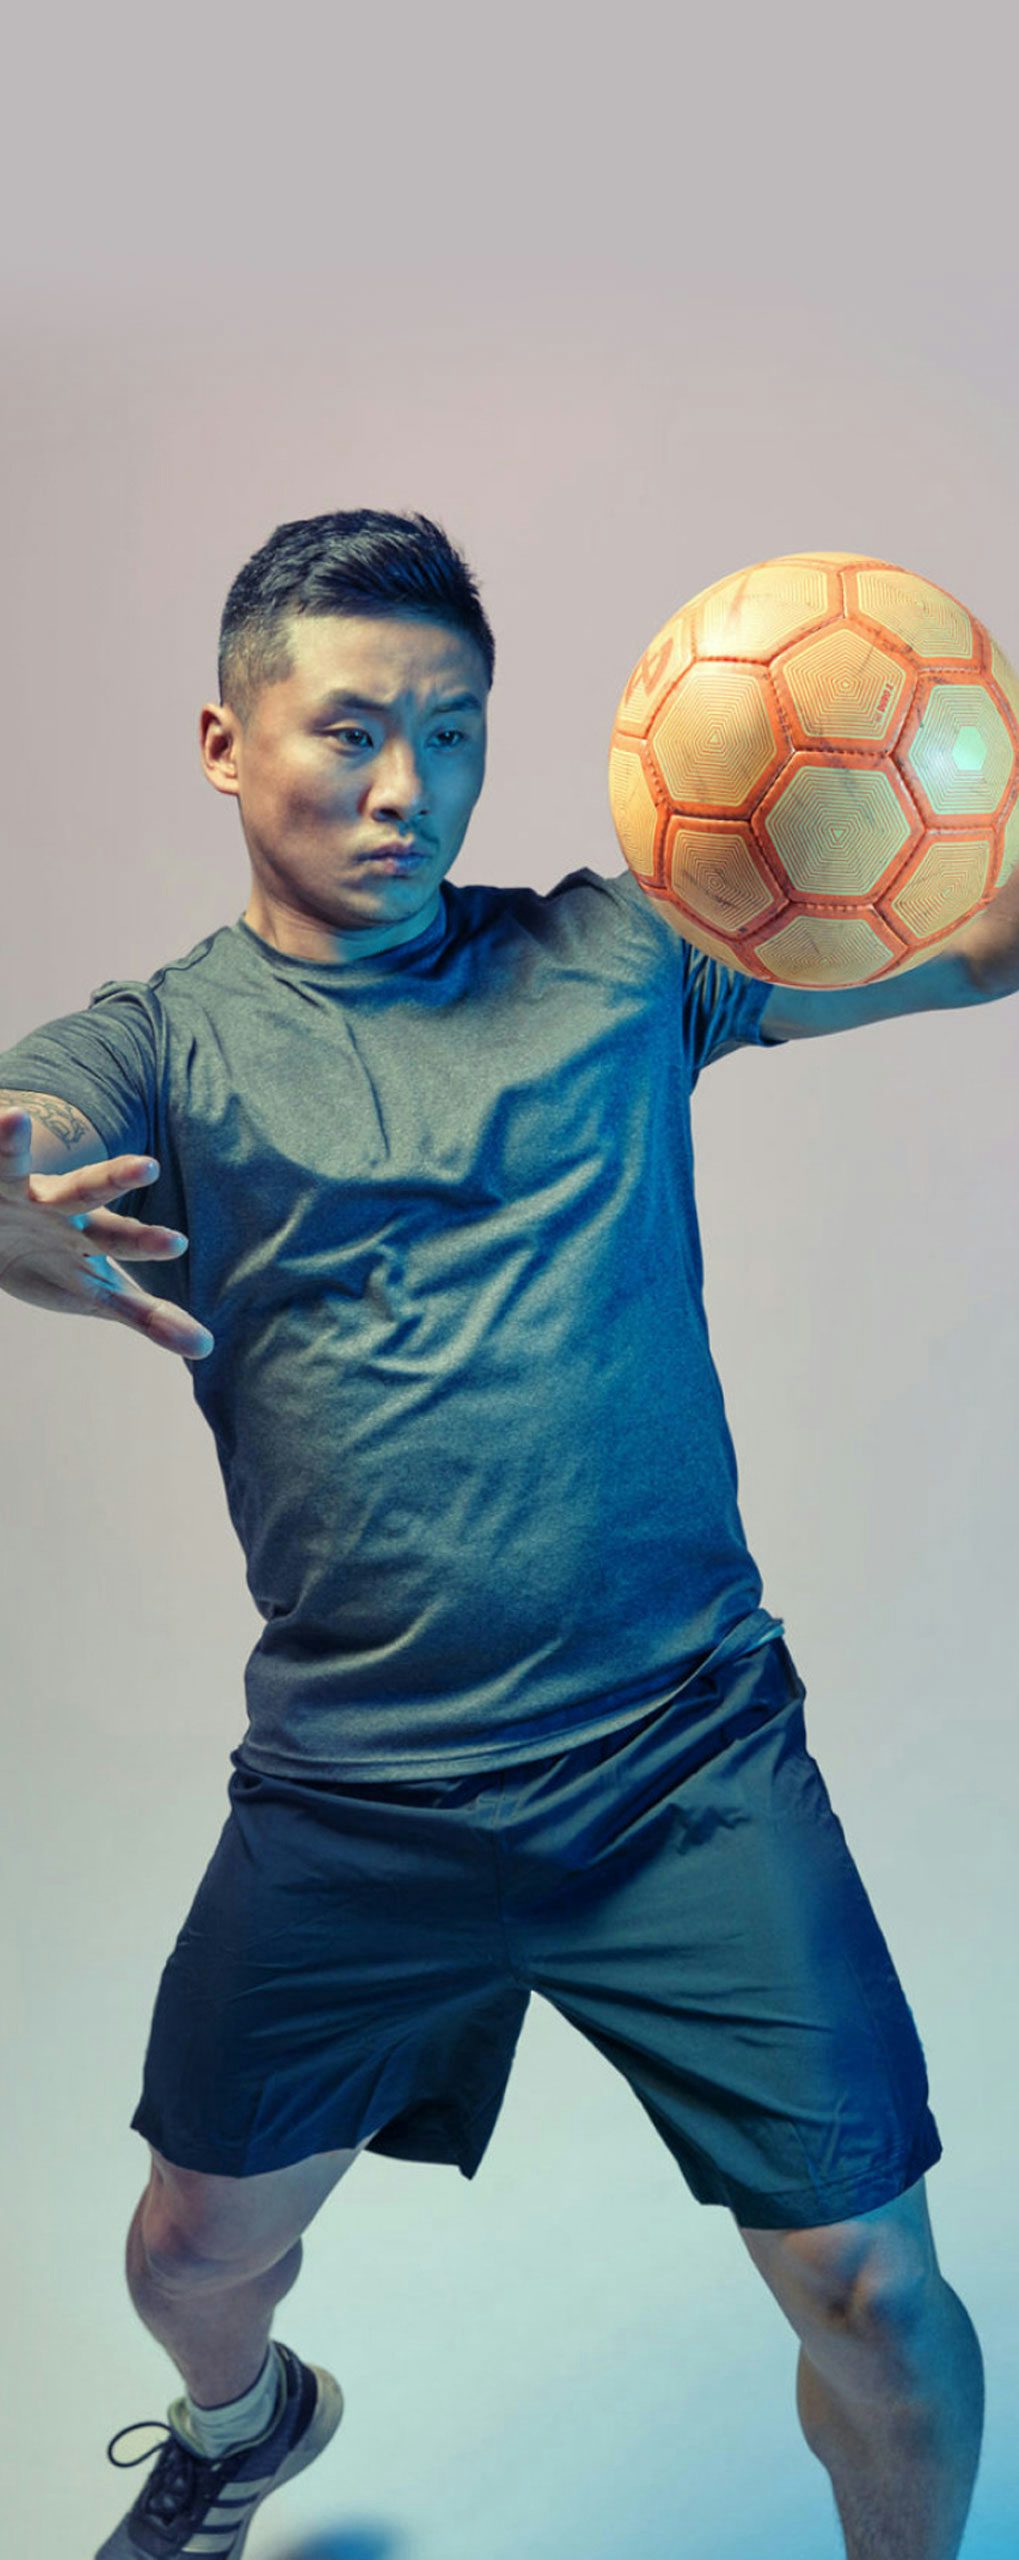 An Asian/Pacific Islander man playing with soccer ball